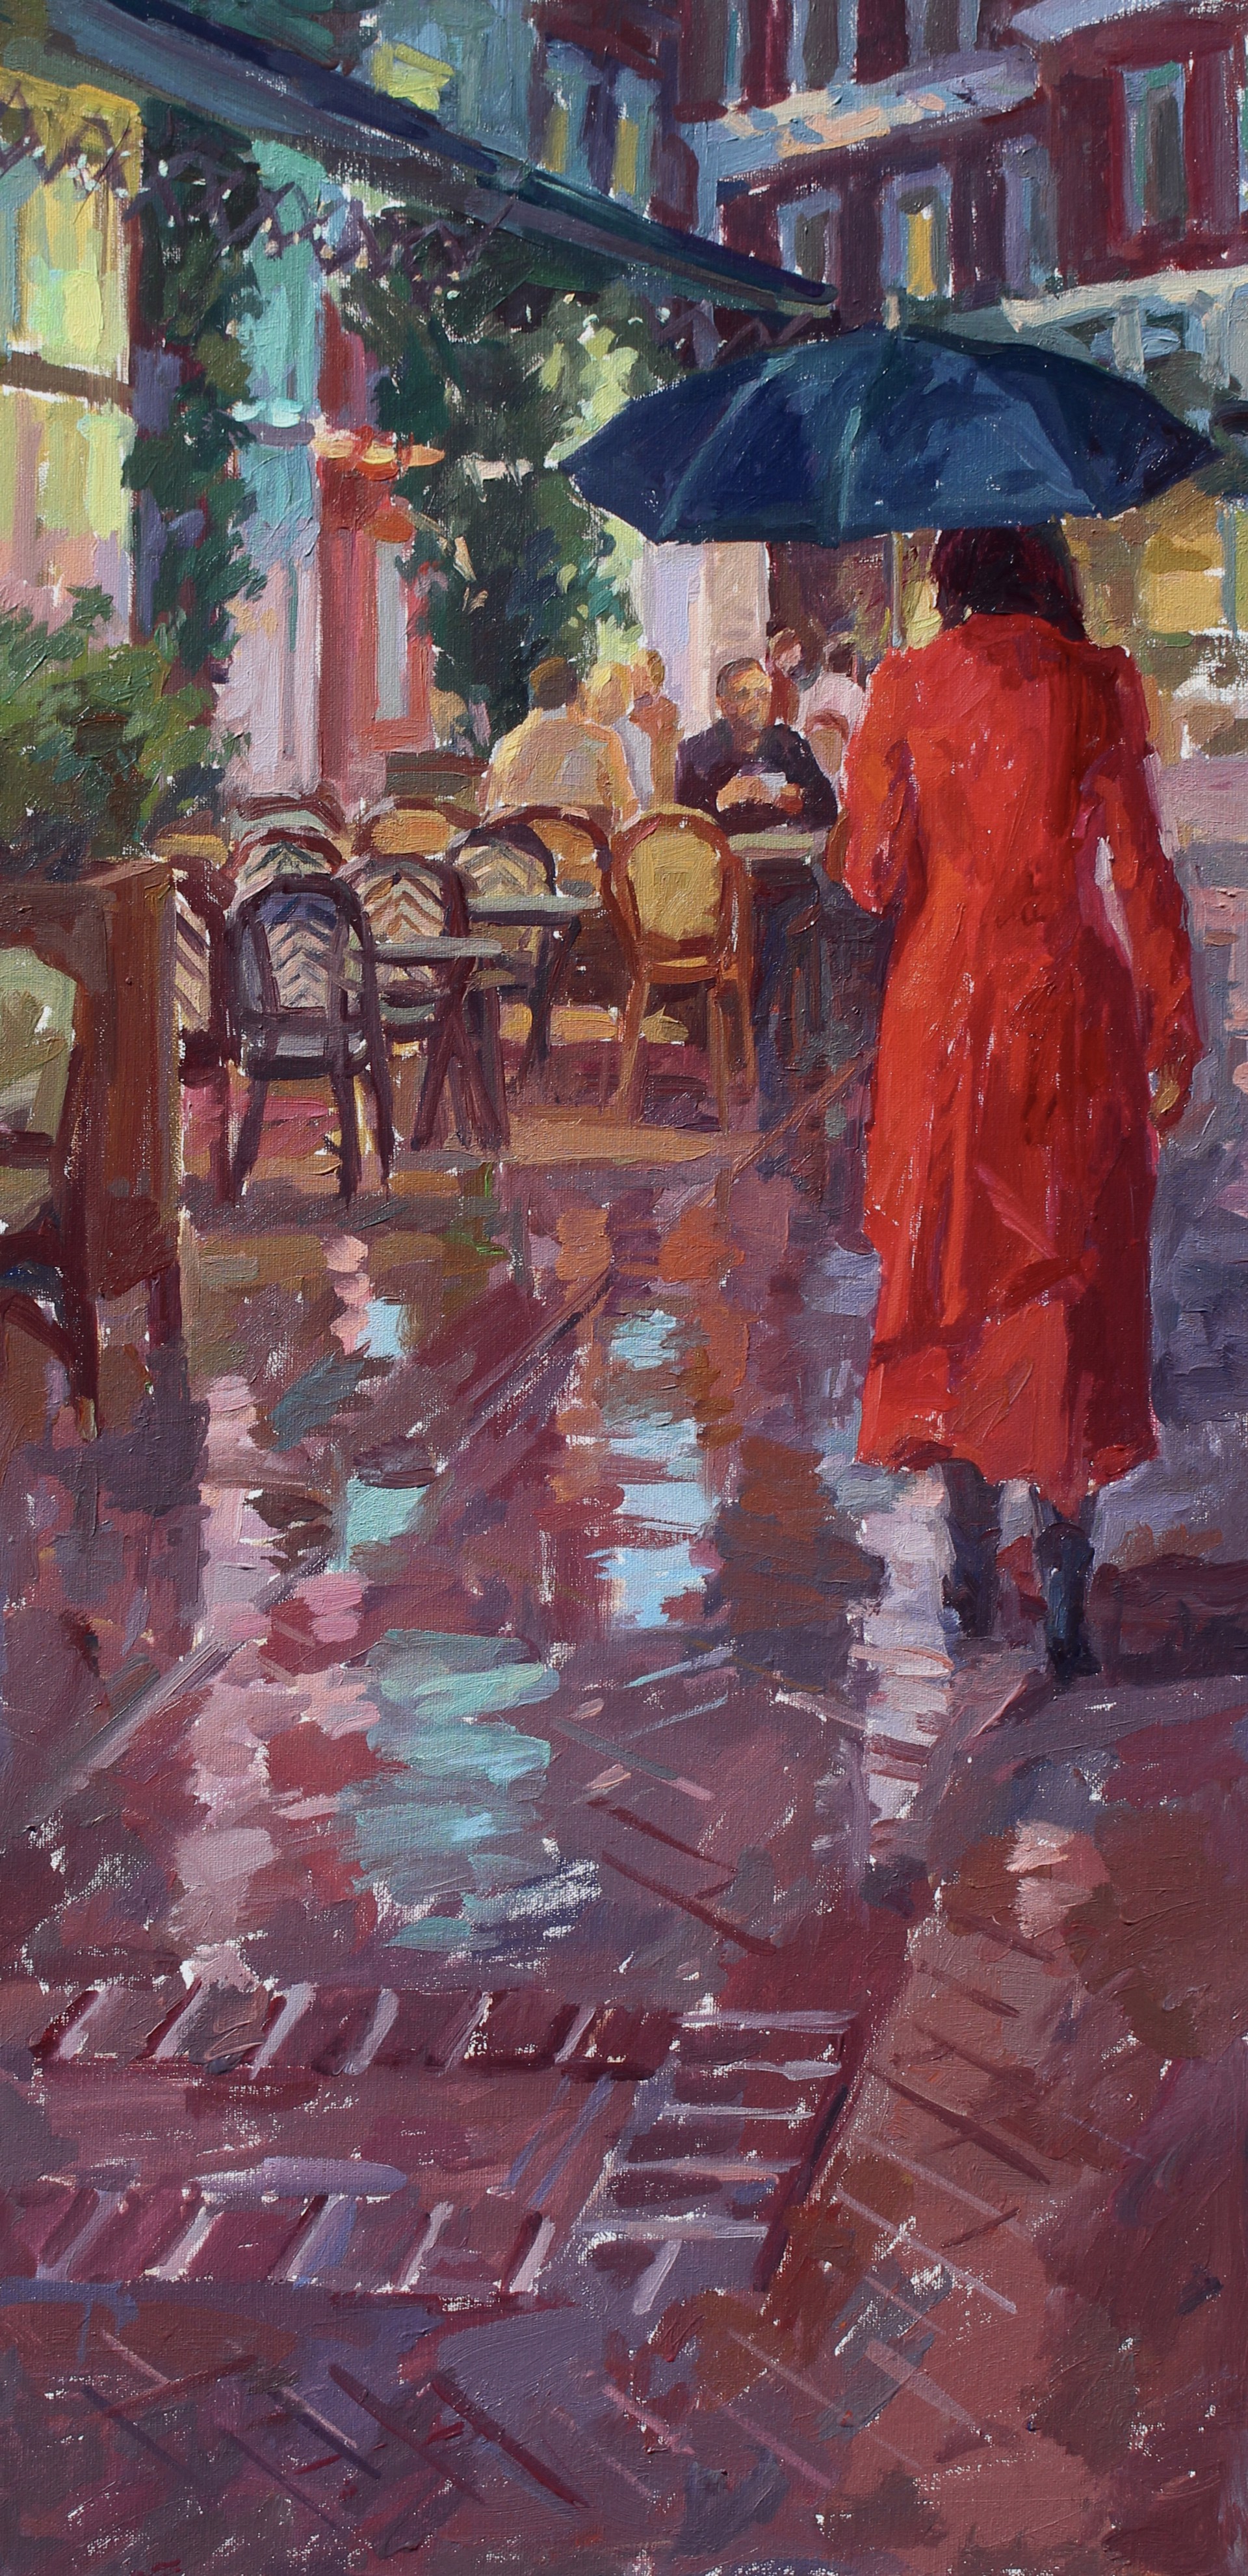 Red Coat in the Rain, Amsterdam by Simie Maryles